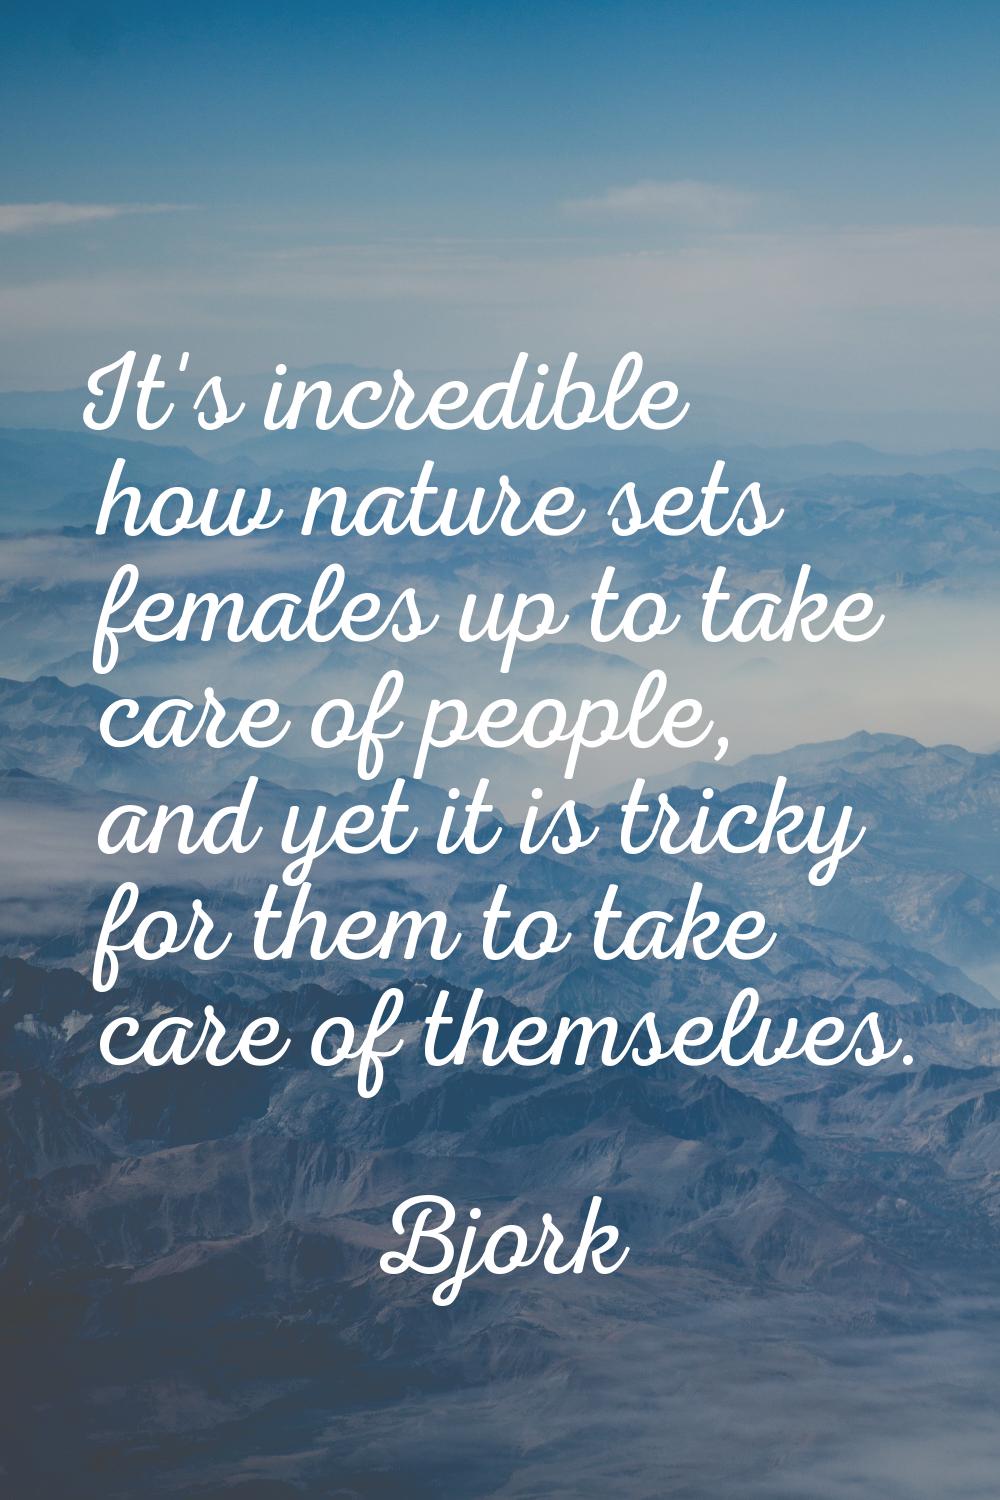 It's incredible how nature sets females up to take care of people, and yet it is tricky for them to